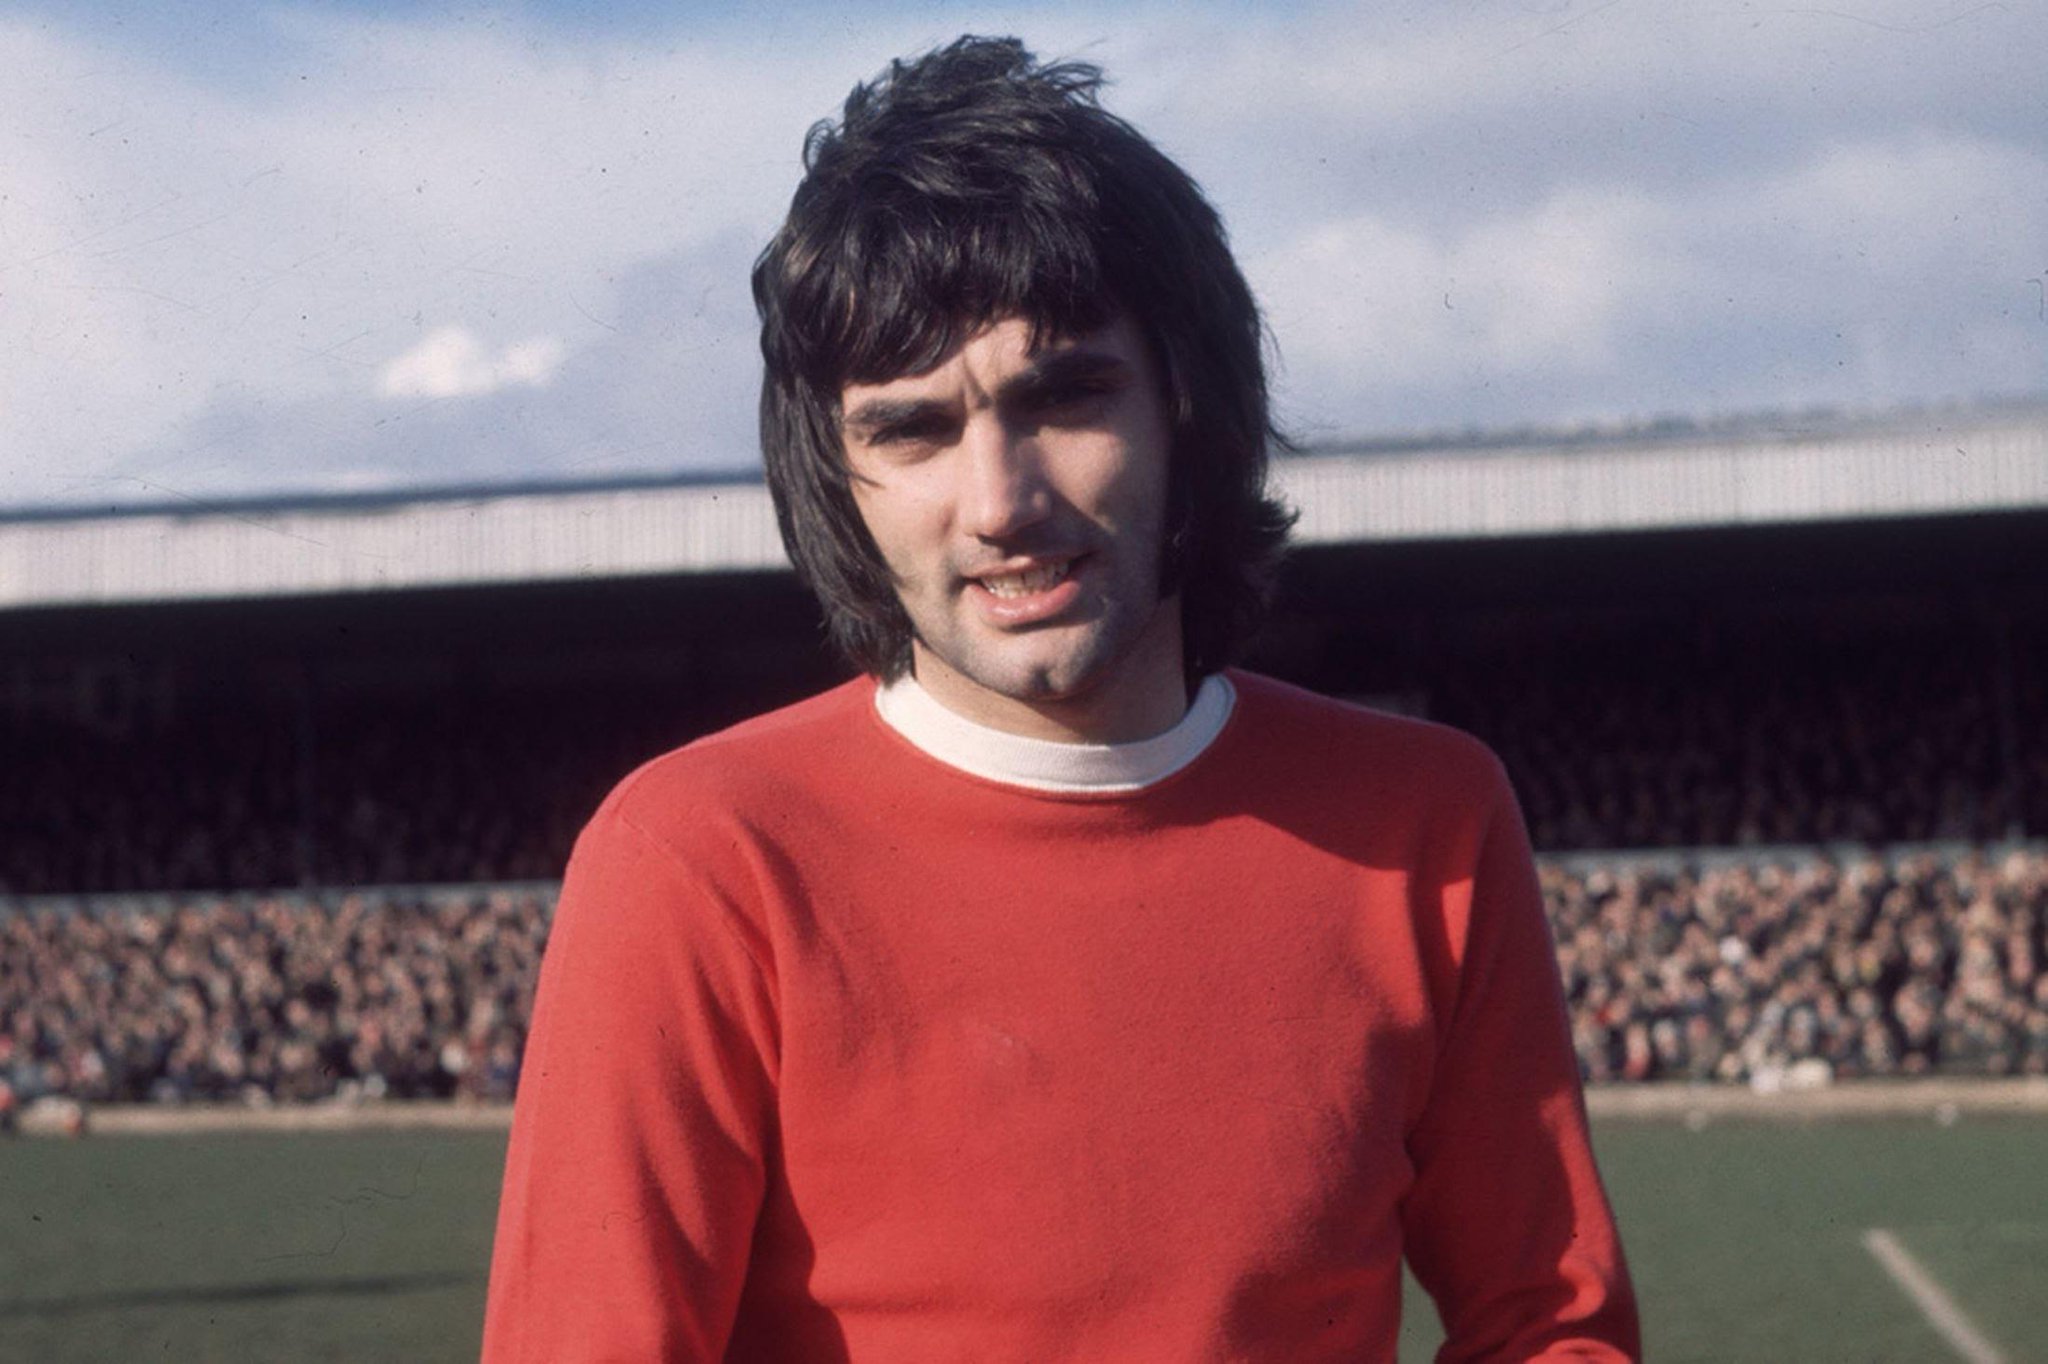 Happy Birthday to George Best! What a player he was for Manchester United! 